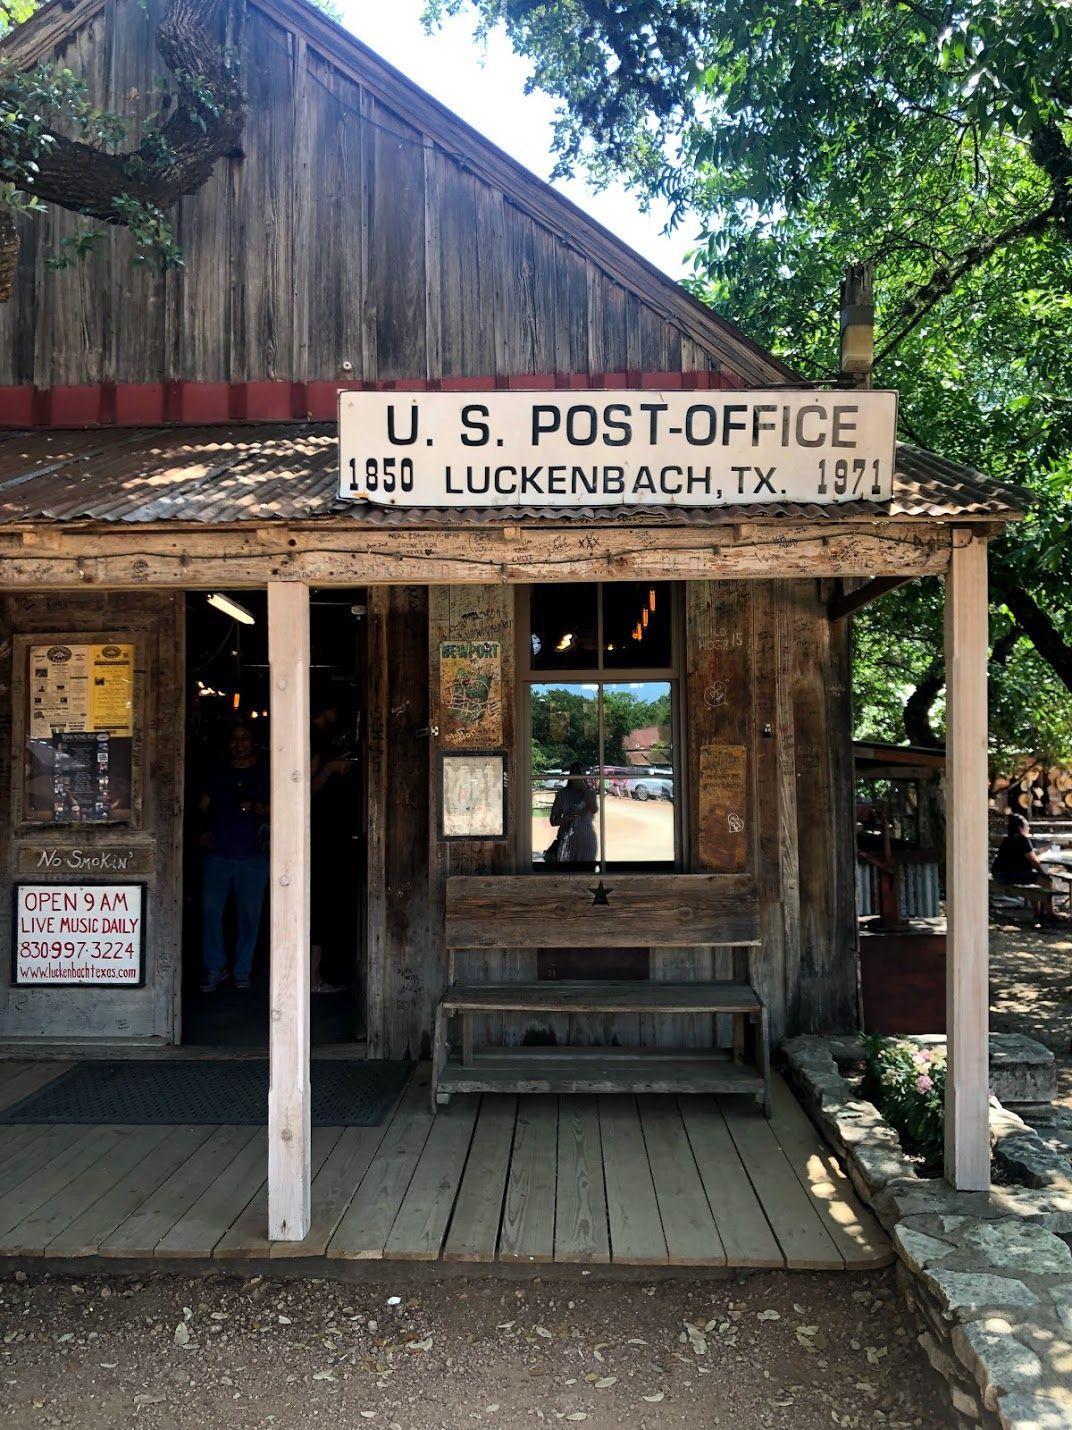 The Luckenbach post office, a wooden building with a sign that reads 1850 - 1971